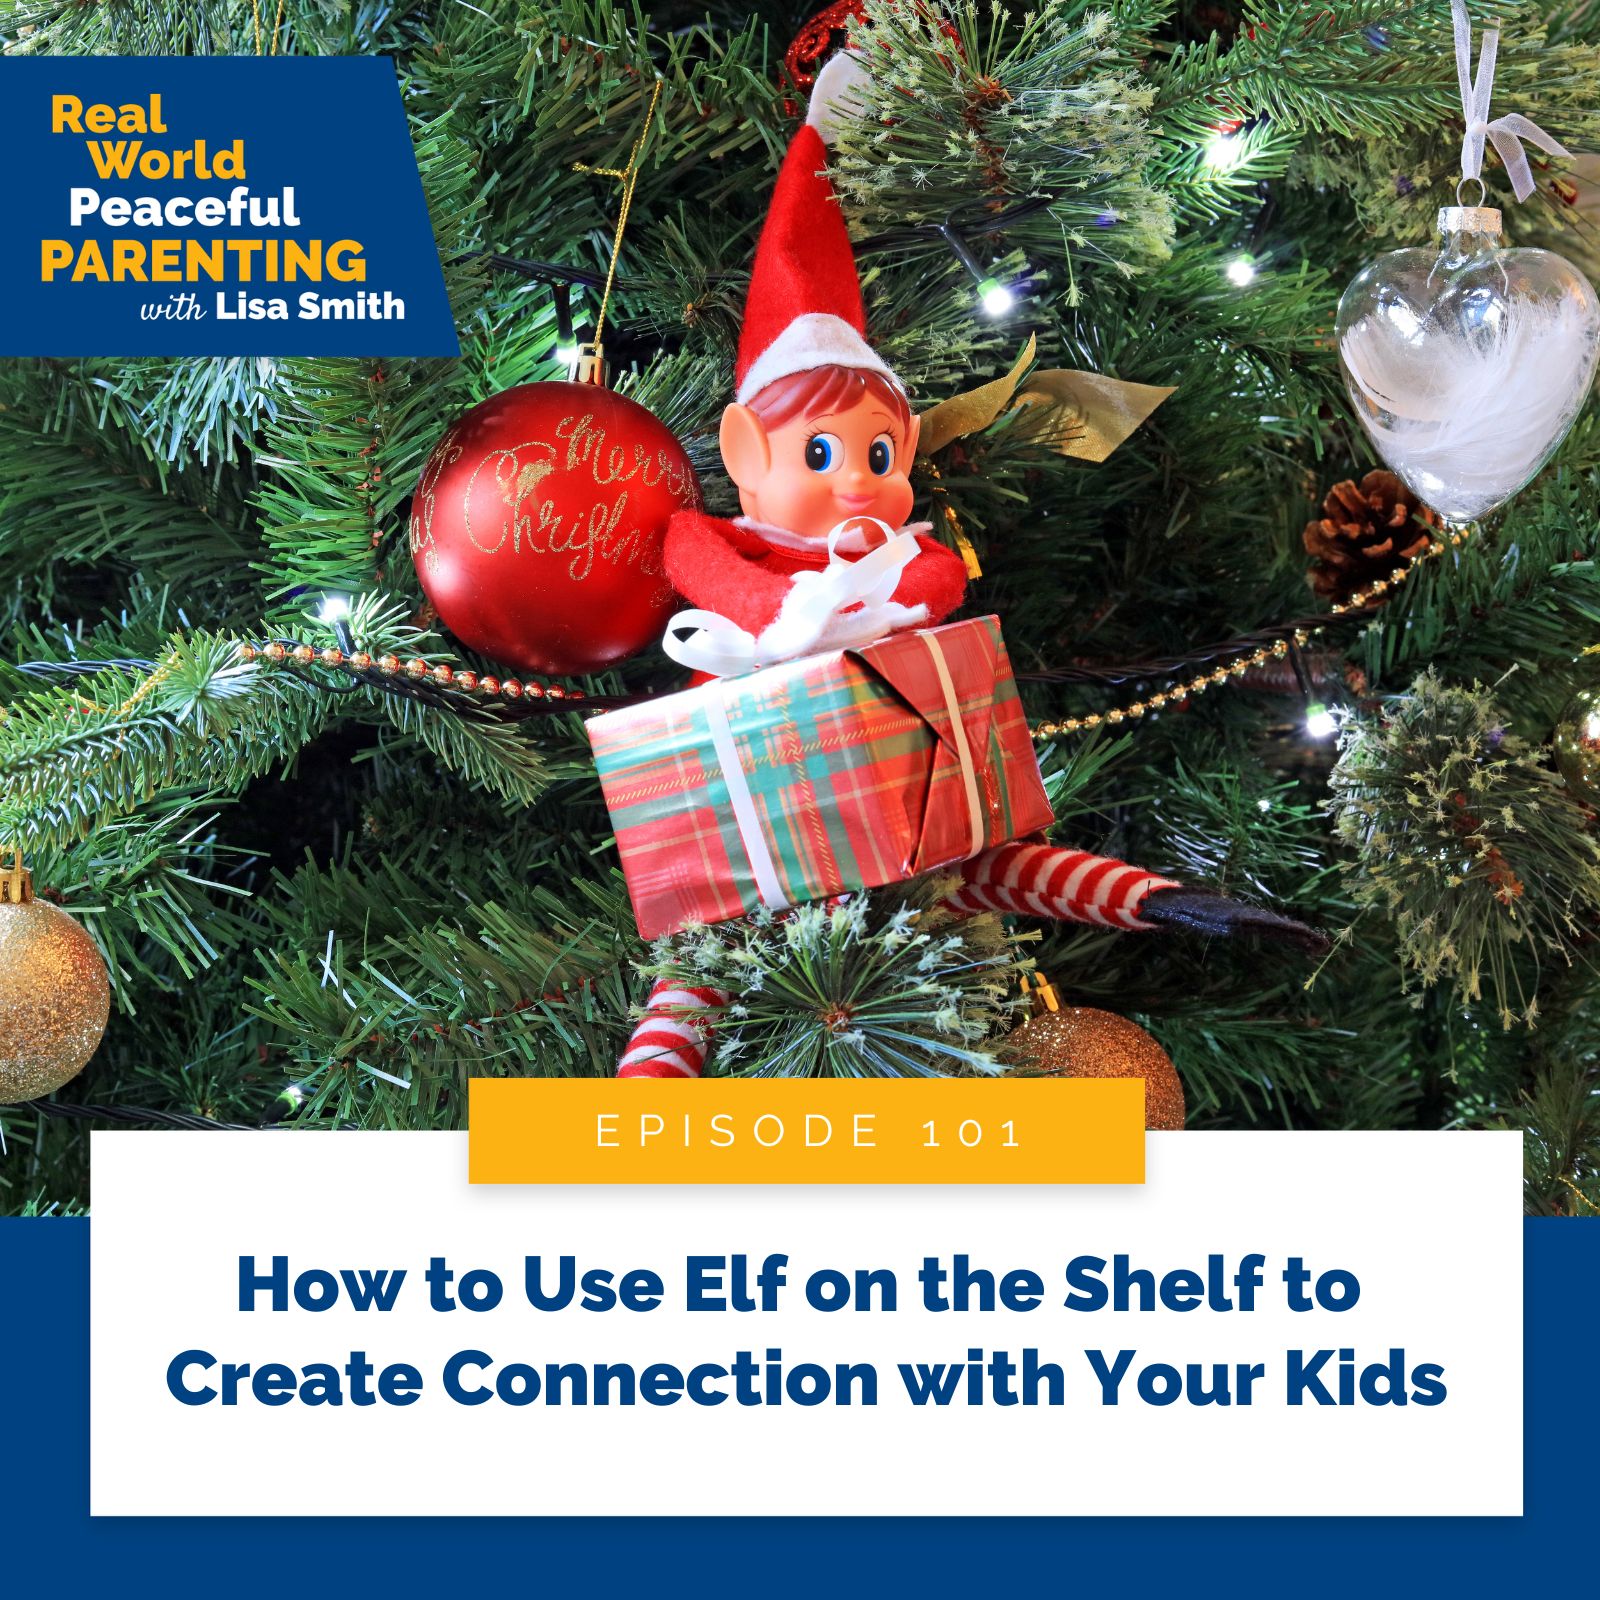 Real World Peaceful Parenting with Lisa Smith | How to Use Elf on the Shelf to Create Connection with Your Kids